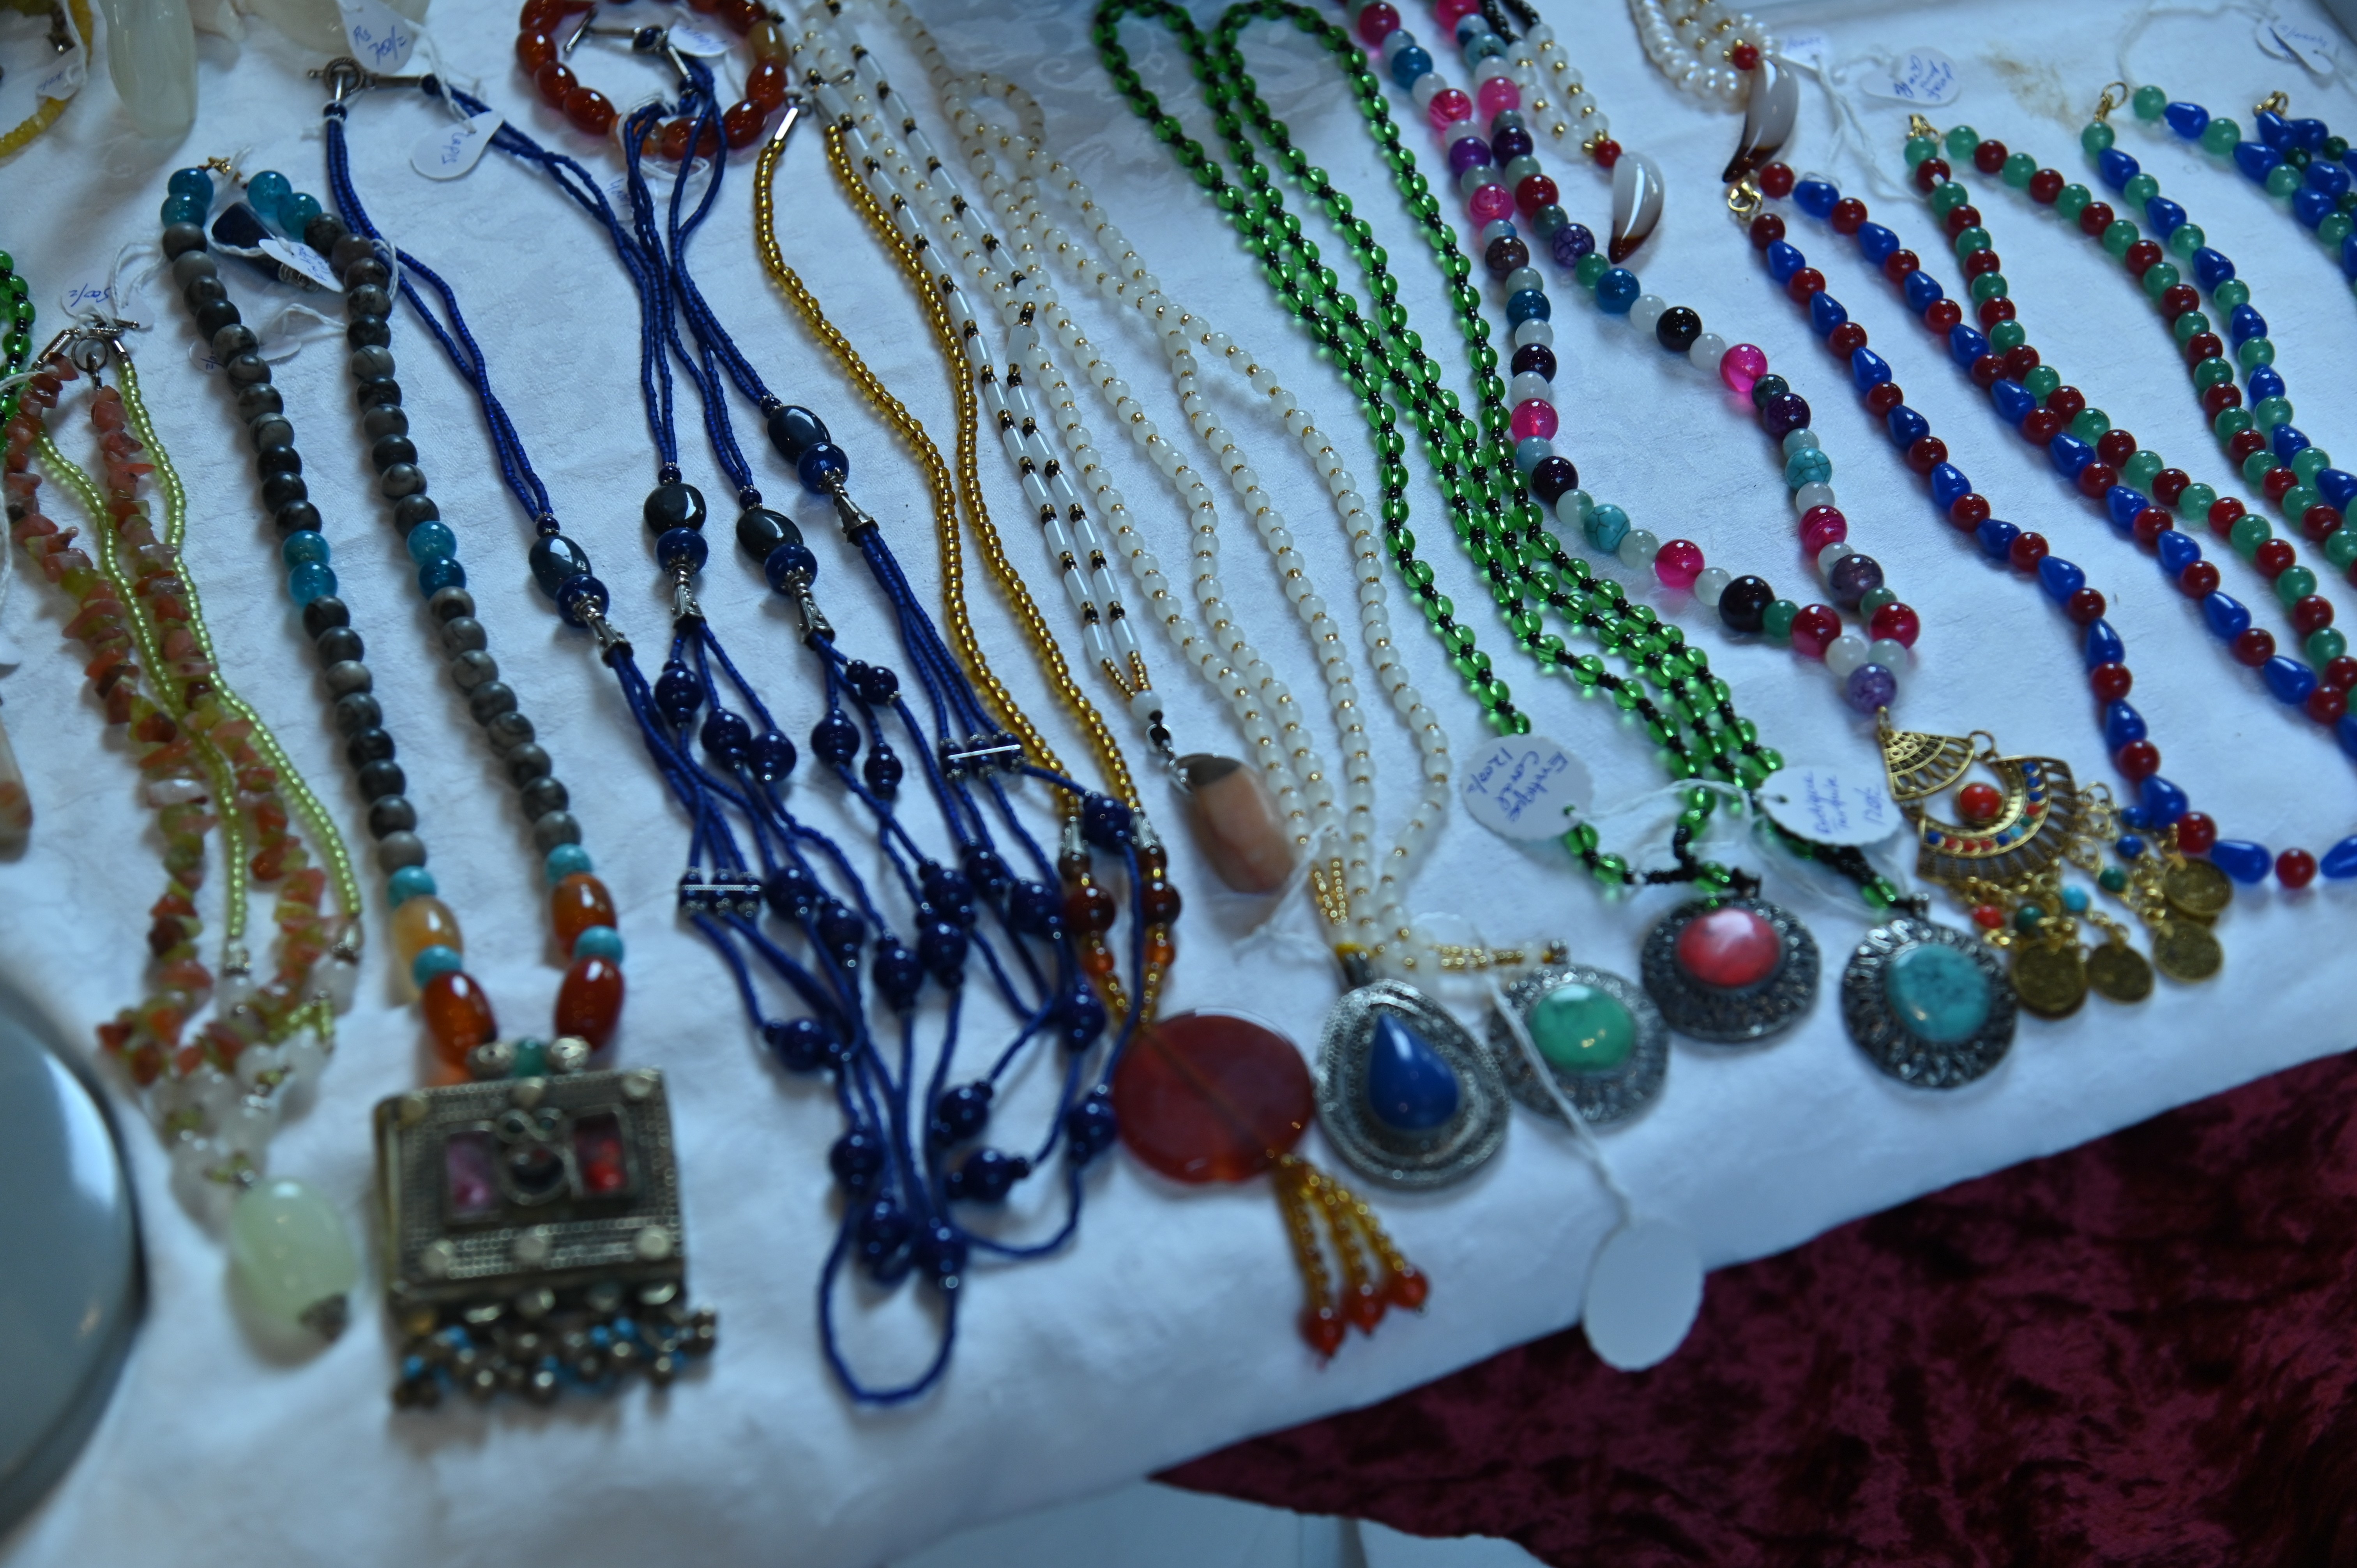 A stall of elegant vintage jewelry adorned with pearls and stones.